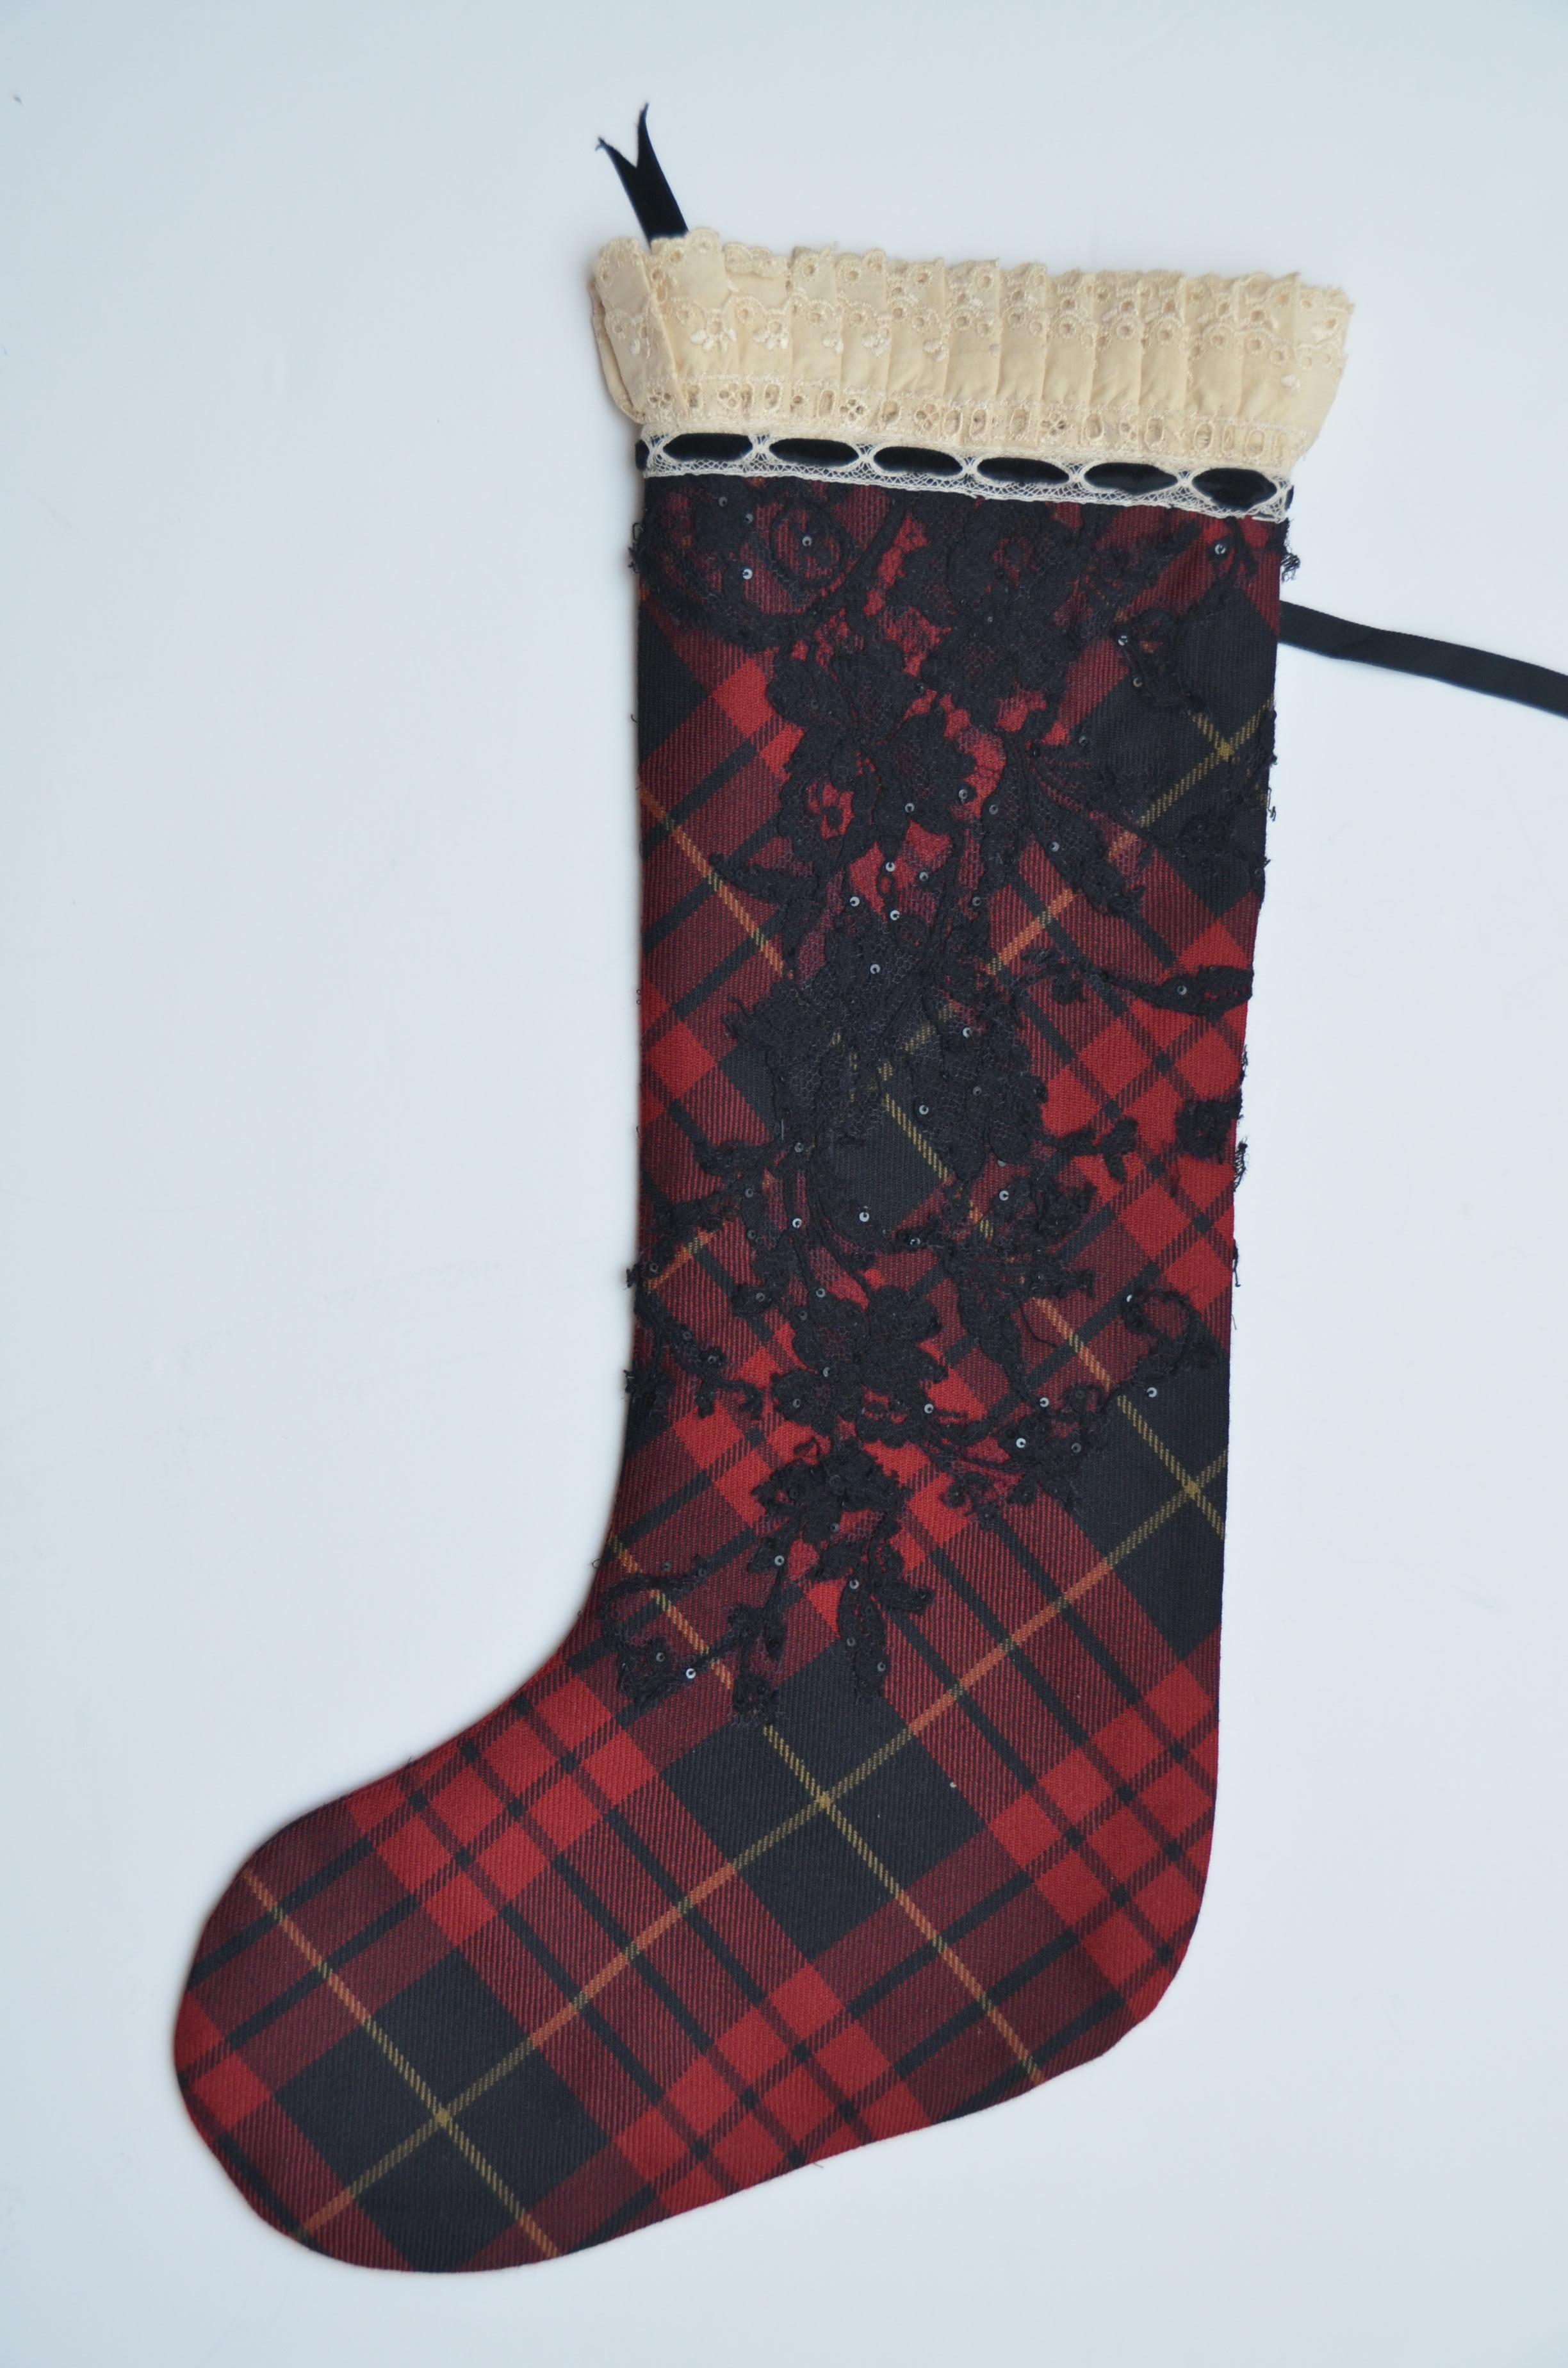 100% AUTHENTIC 
ONE OF A KIND   Alexander McQueen Designer Christmas Stocking 2006 
This stocking was part of the auction in 2006 Handmade and donated by Alexander McQueen company for this very special Christmas 2006 Charity auction that included